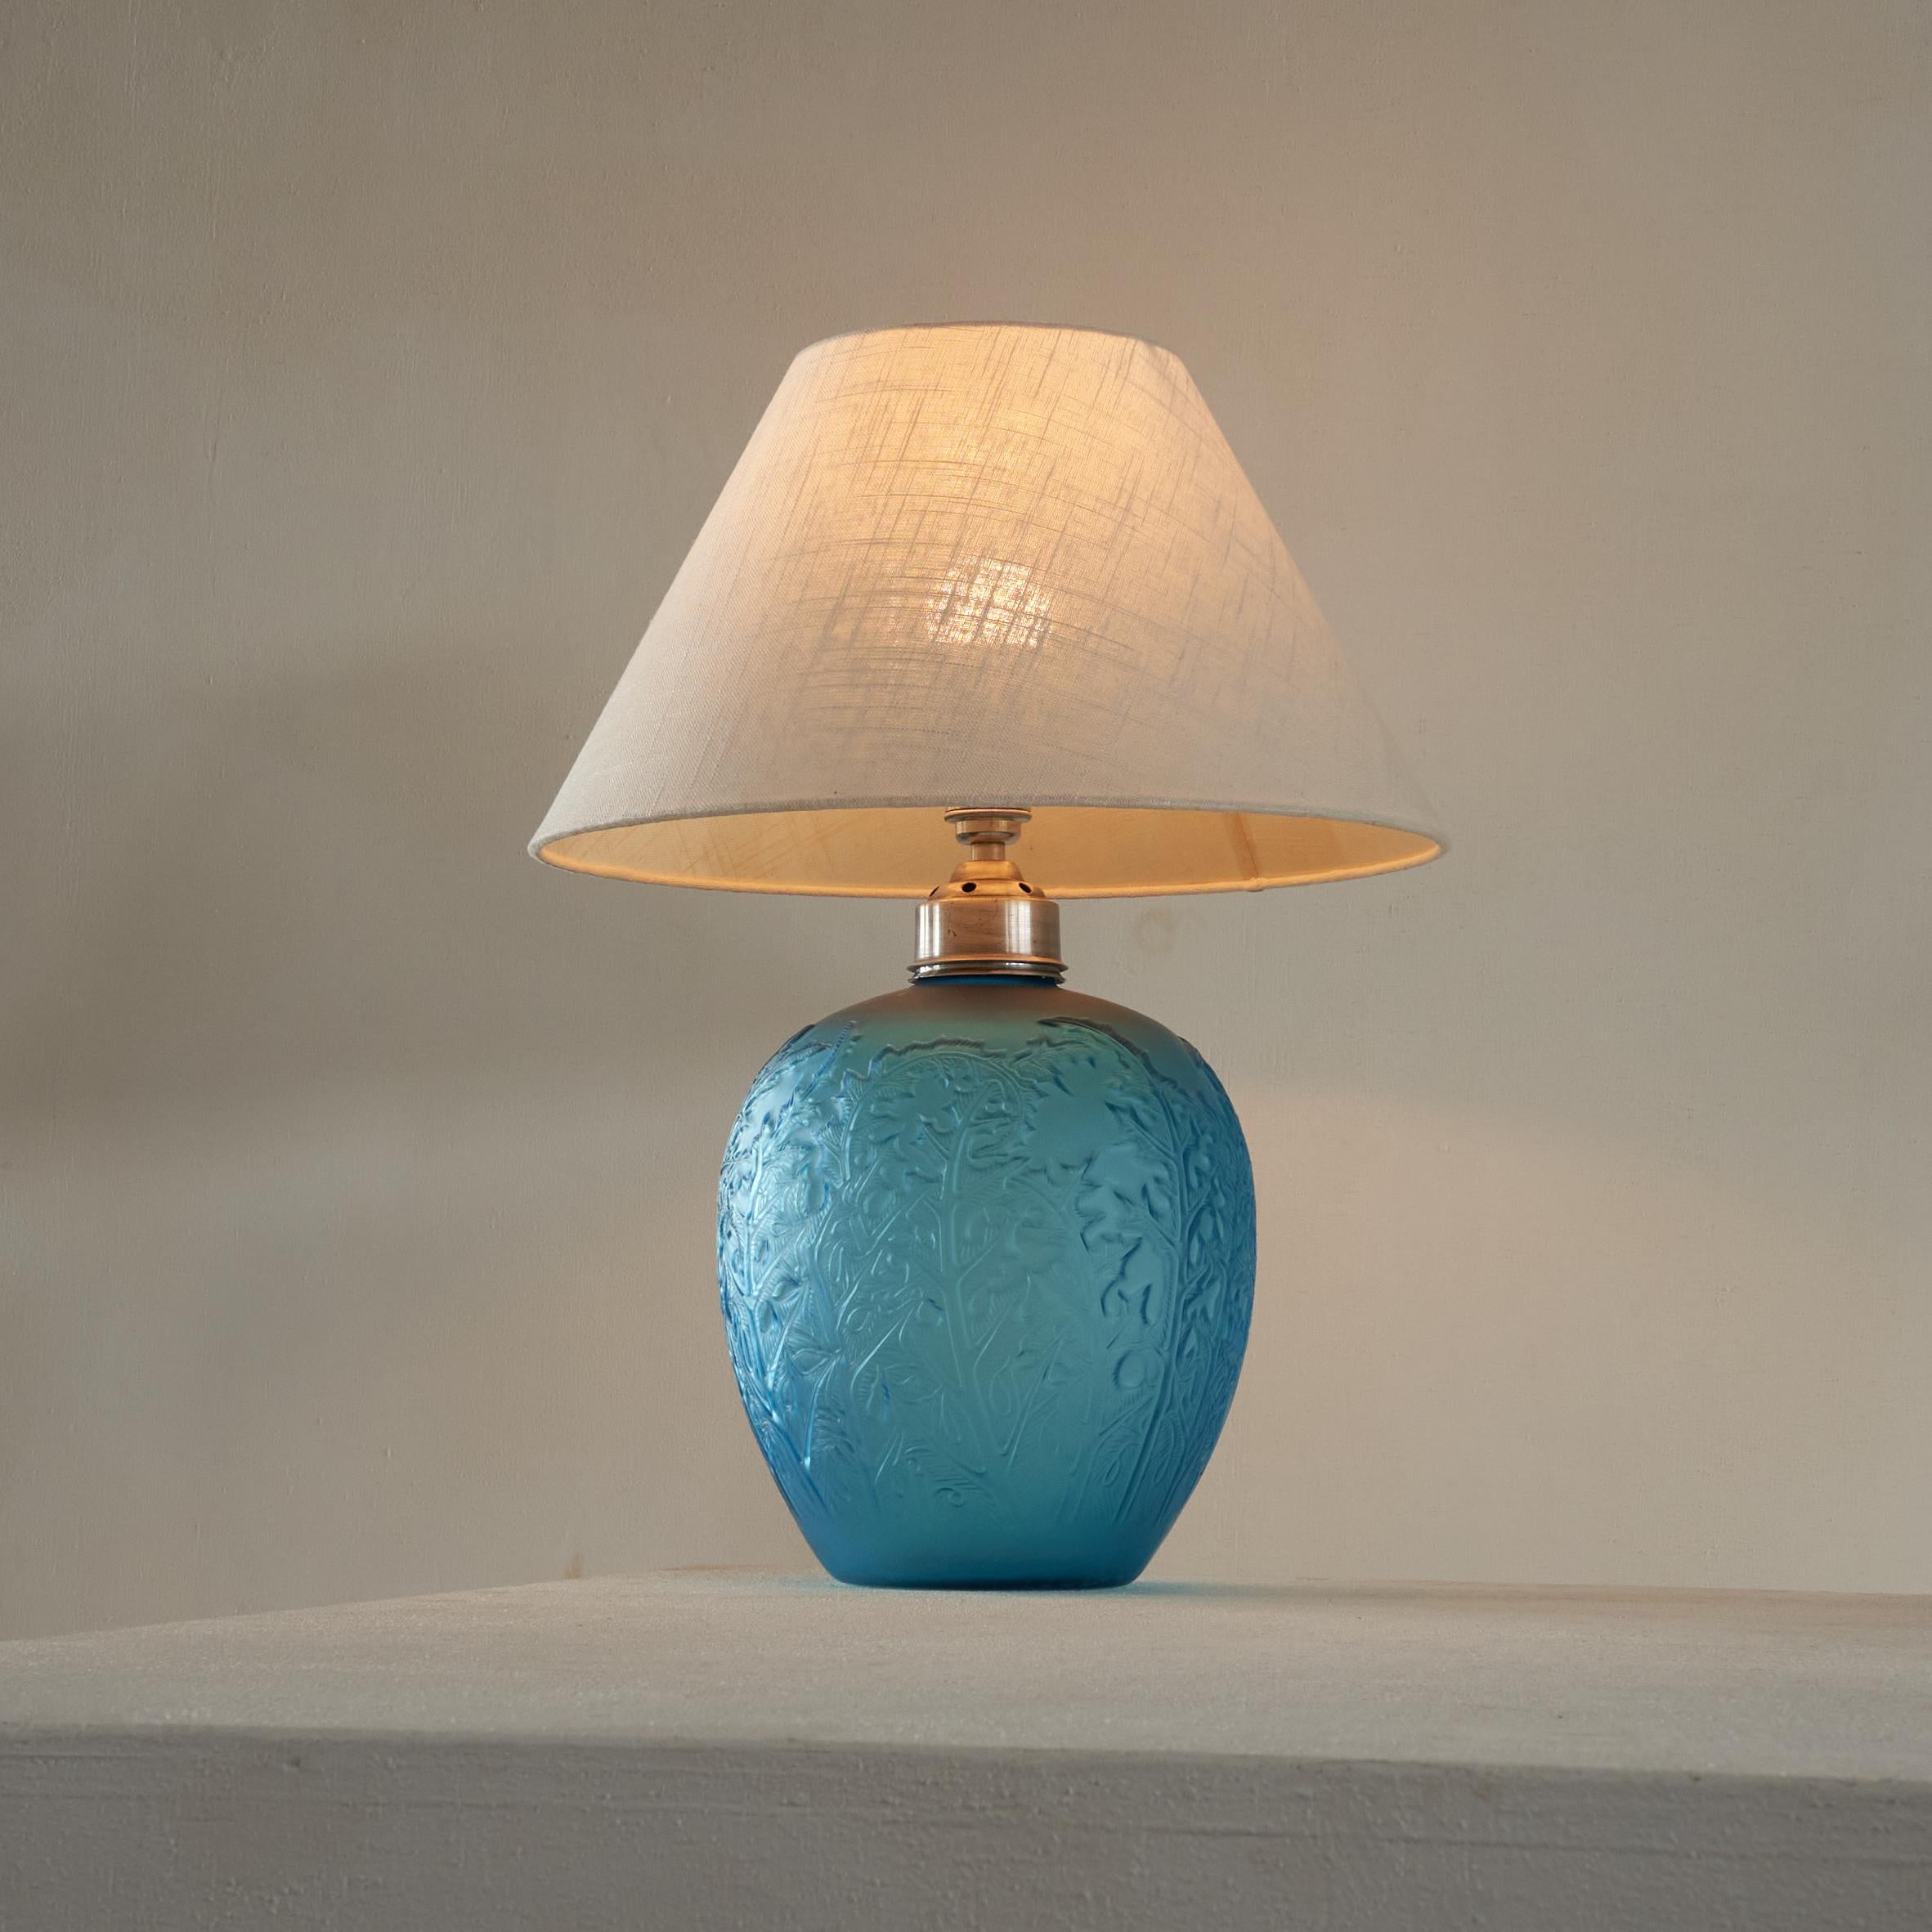 'Acanthes' Table Lamp after René Lalique by Consolidated Glass Company 1930s For Sale 1